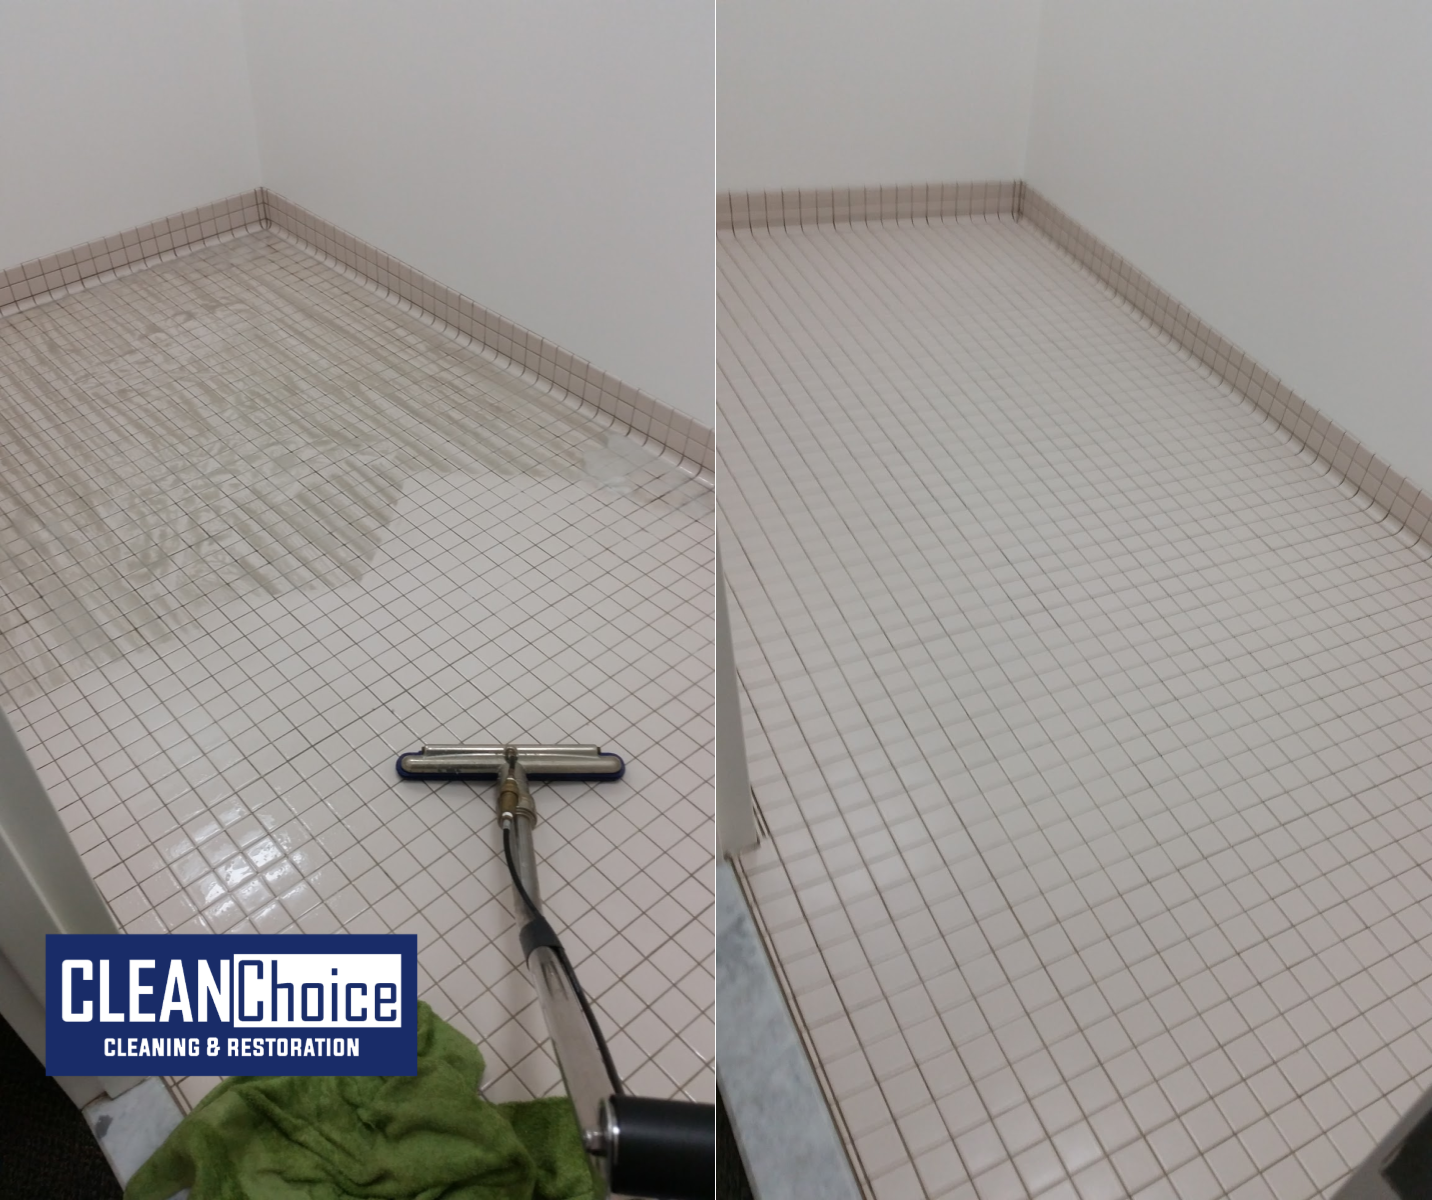 How Do Professionals Clean Grout & Why It's Better than DIY